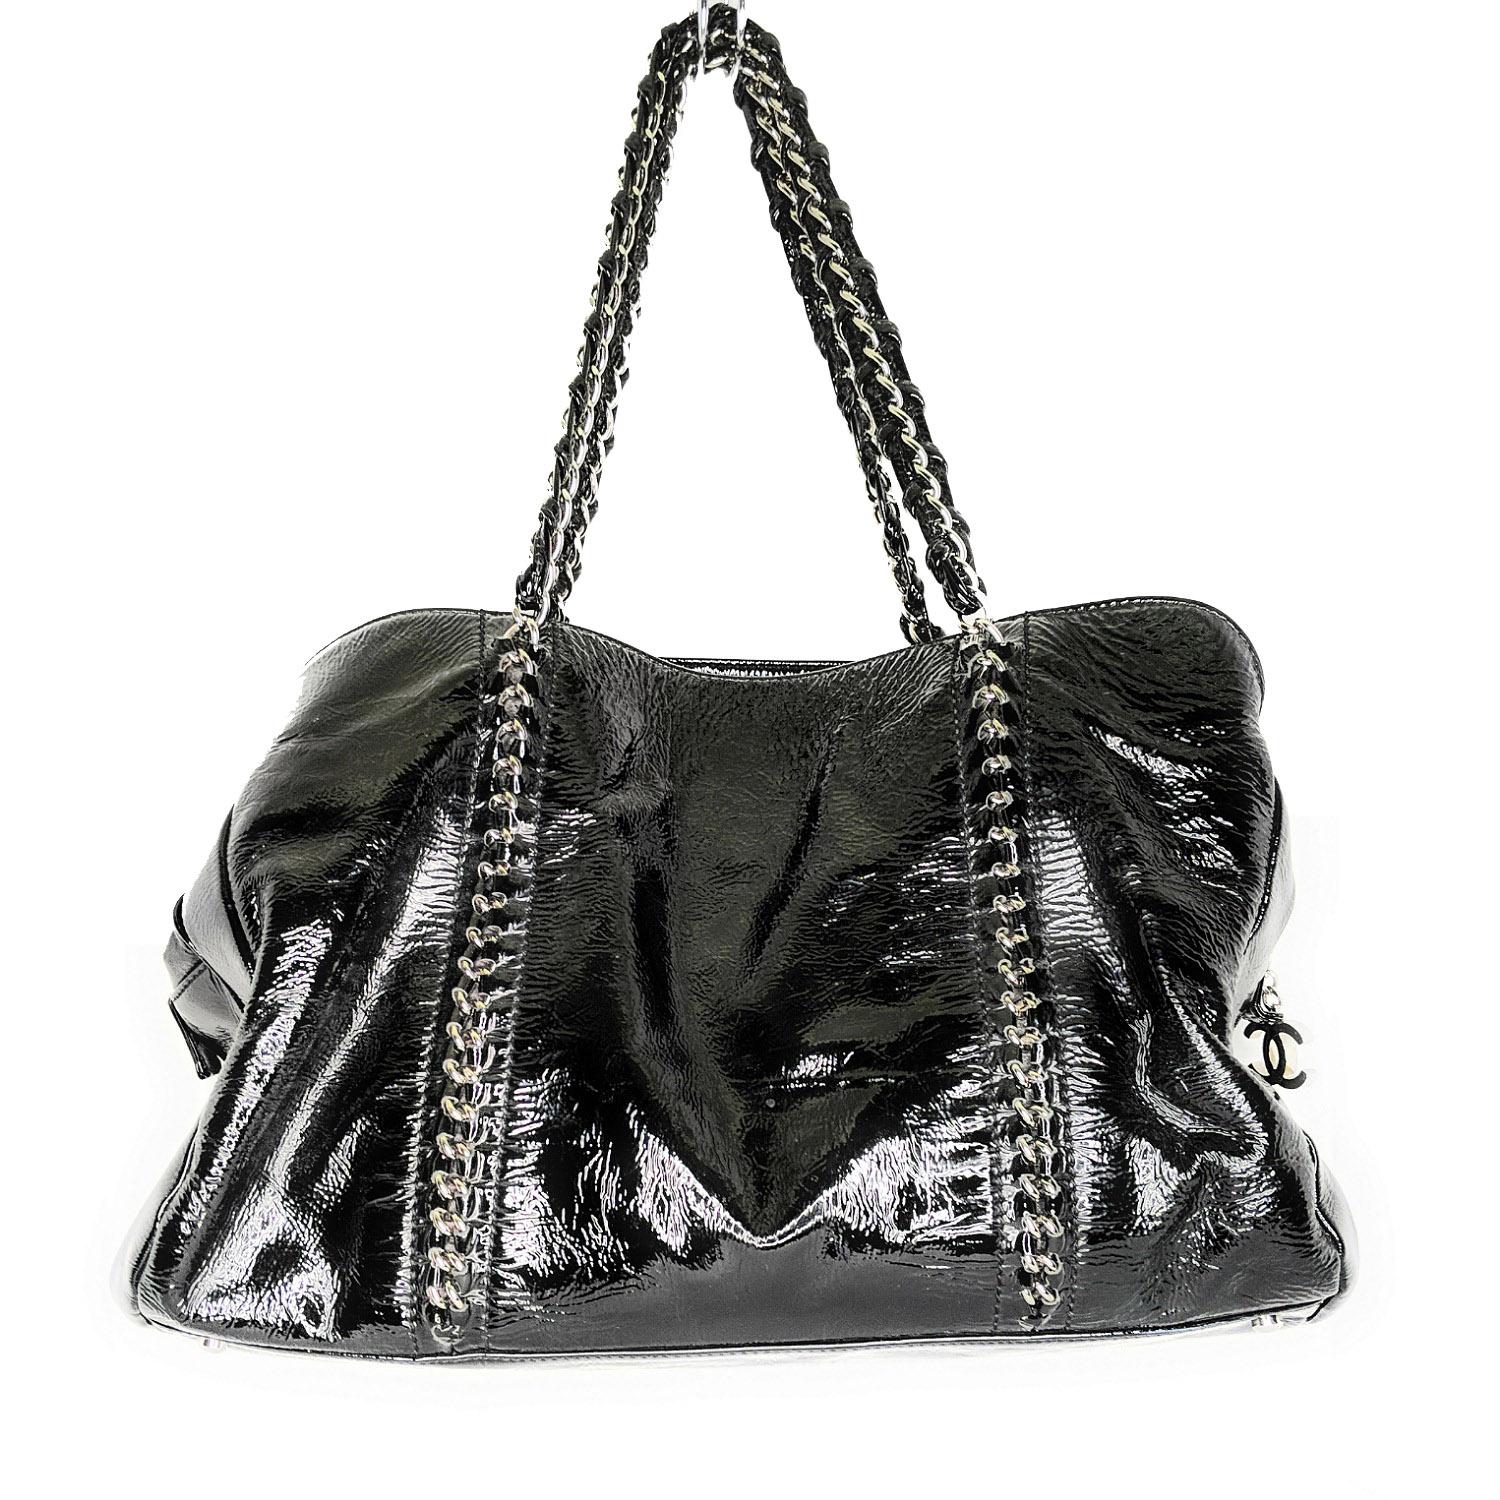 This glamorous Chanel Black Patent Leather Luxe Ligne Large Tote Bag is truly desirable. It features a sleek design with silvertone braided leather/chain straps and embedded chain detailing. It also has two large exterior flat pockets for easy